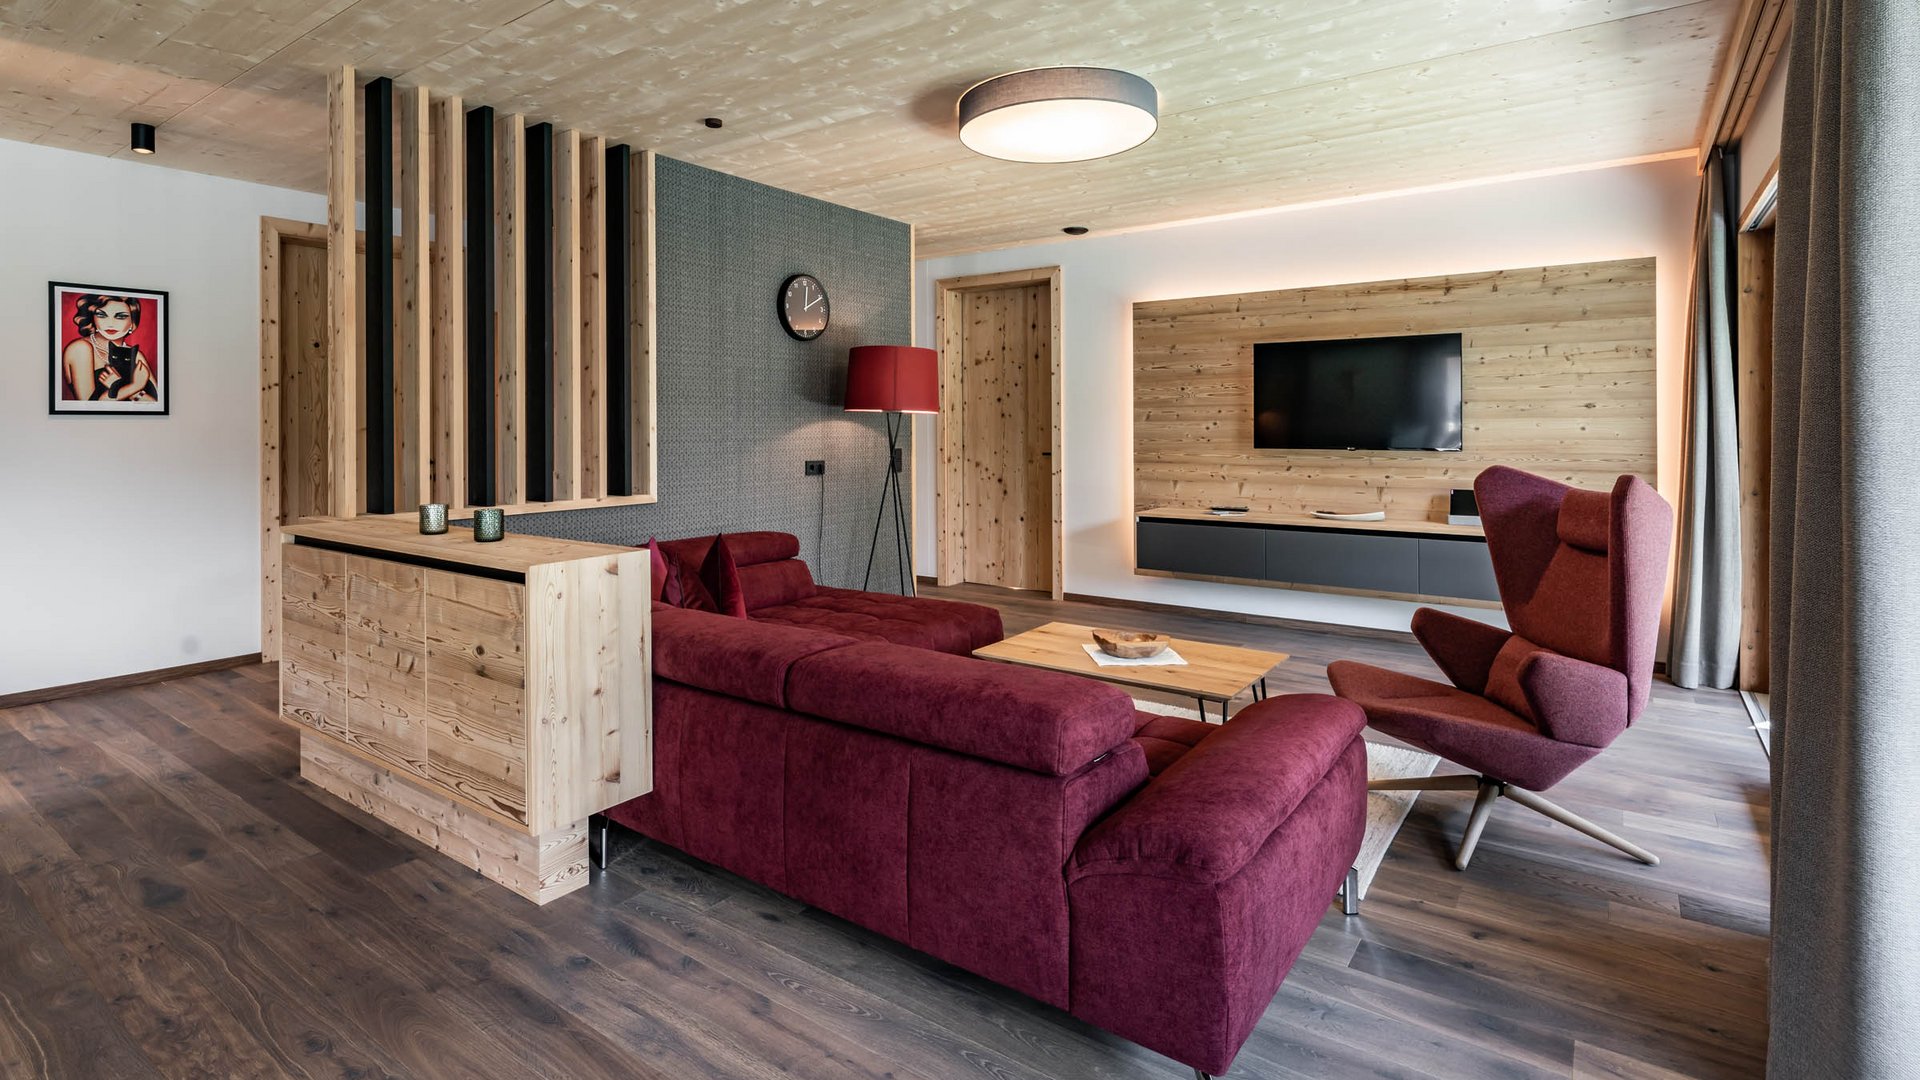 Your accommodation in Zillertal from A to Z